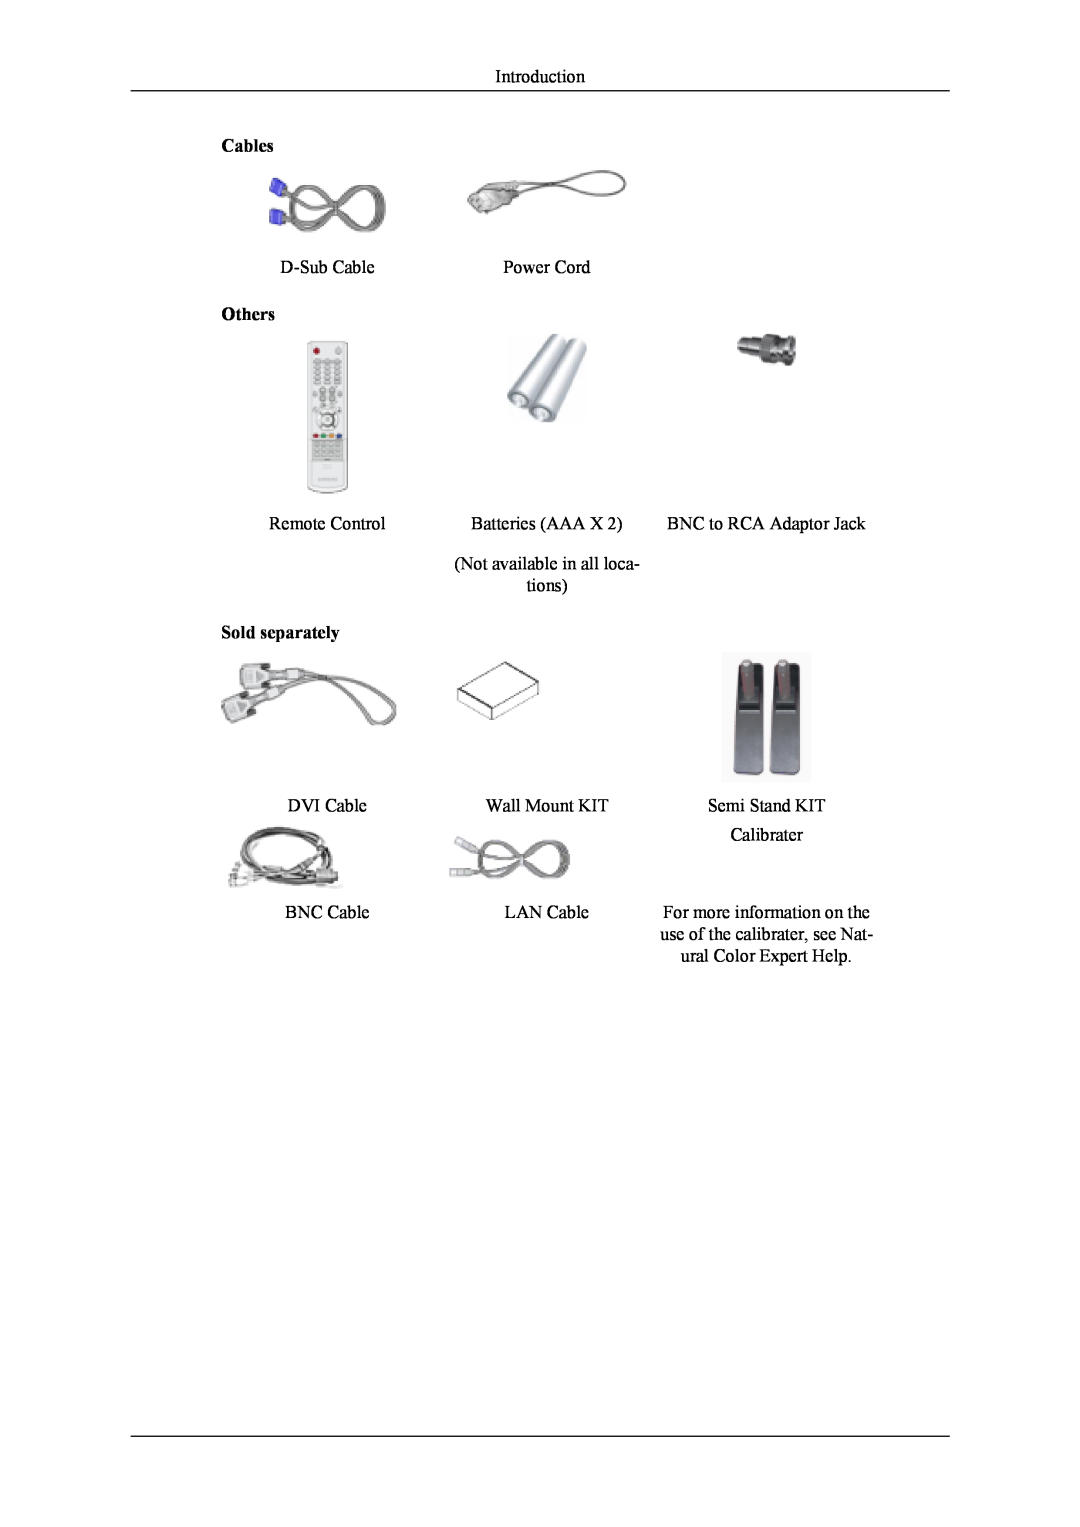 Samsung 400UXn user manual Cables, Others, Sold separately 